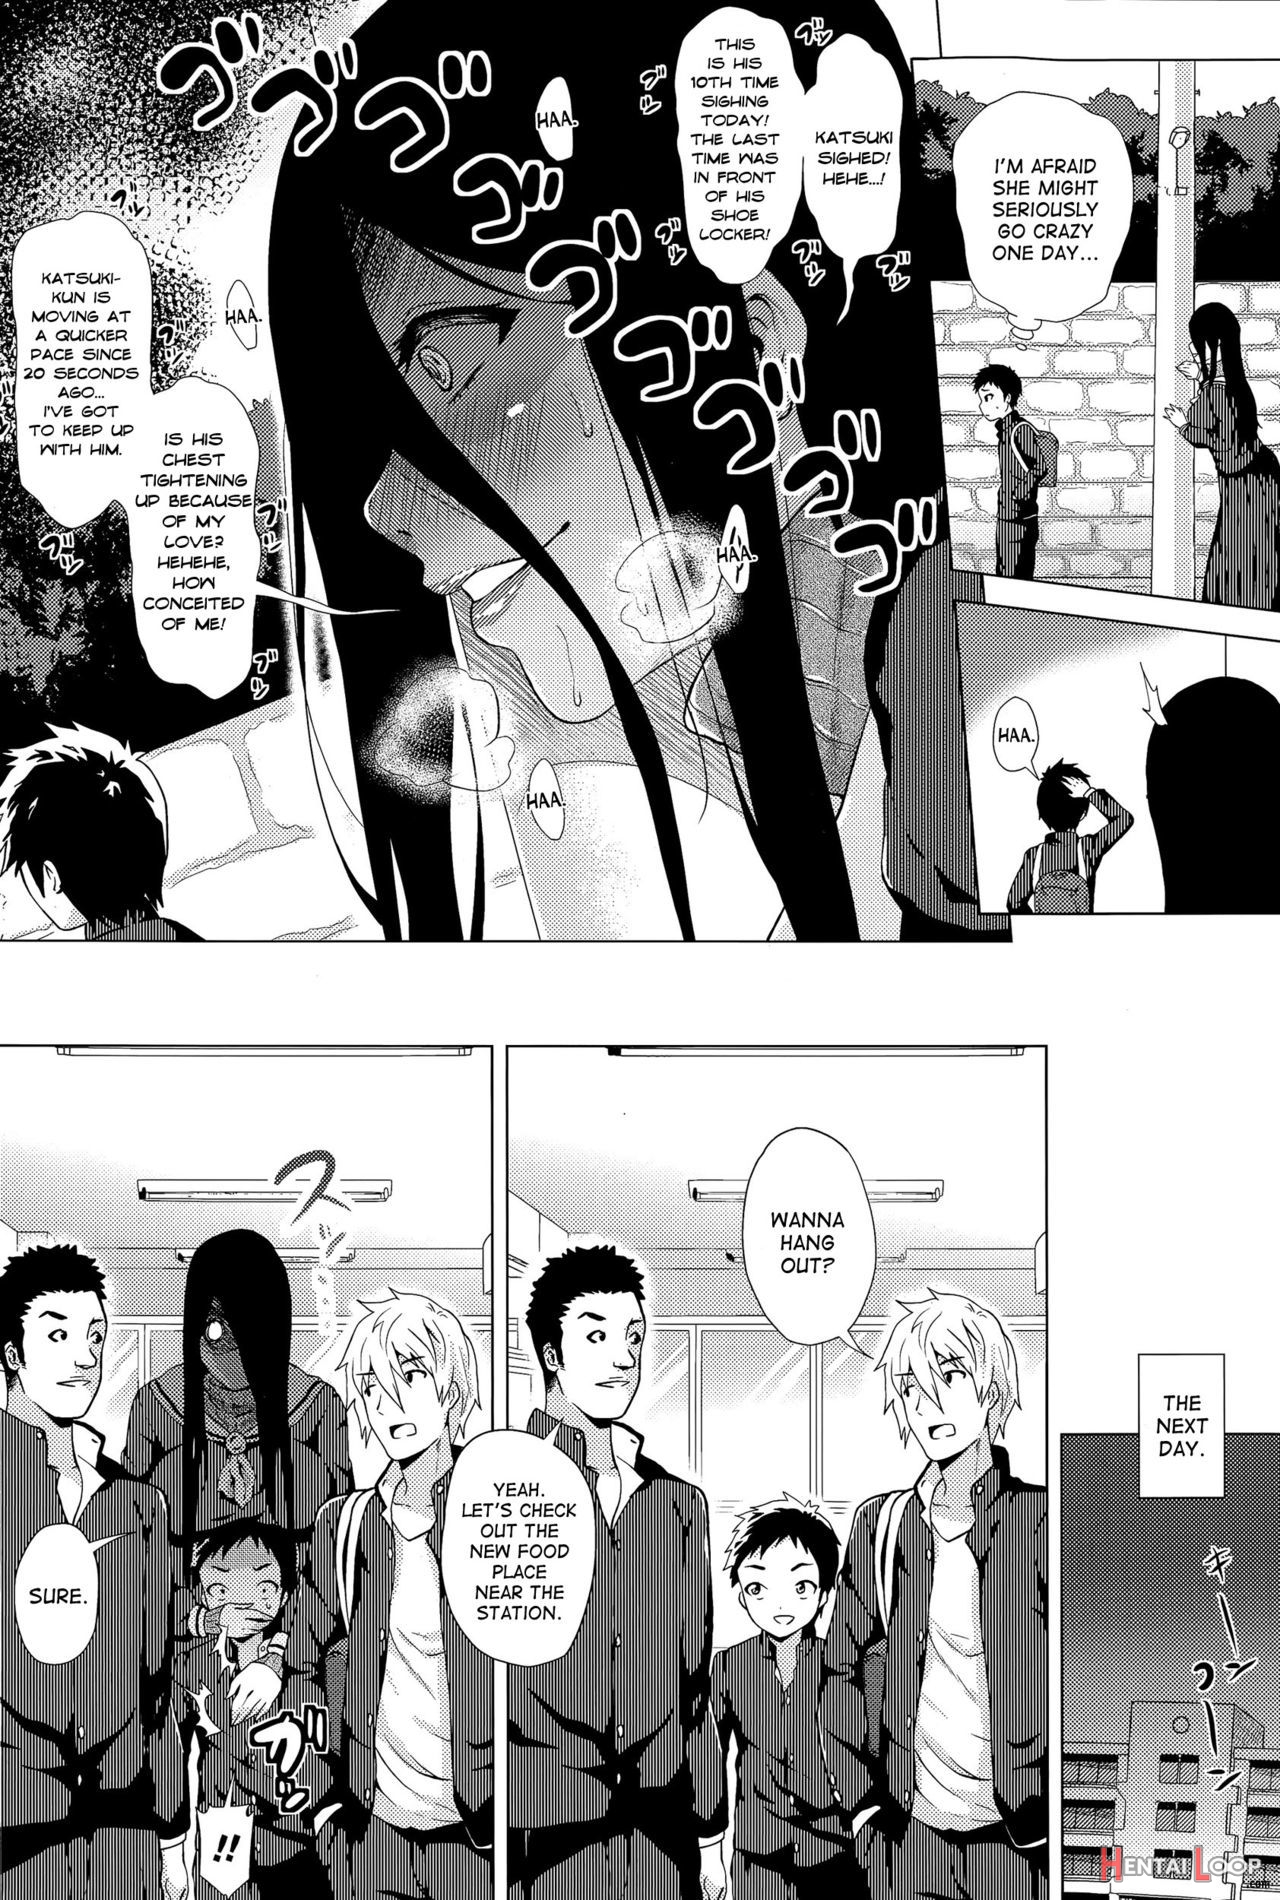 Stalking Girl Ch. 1-3 page 4